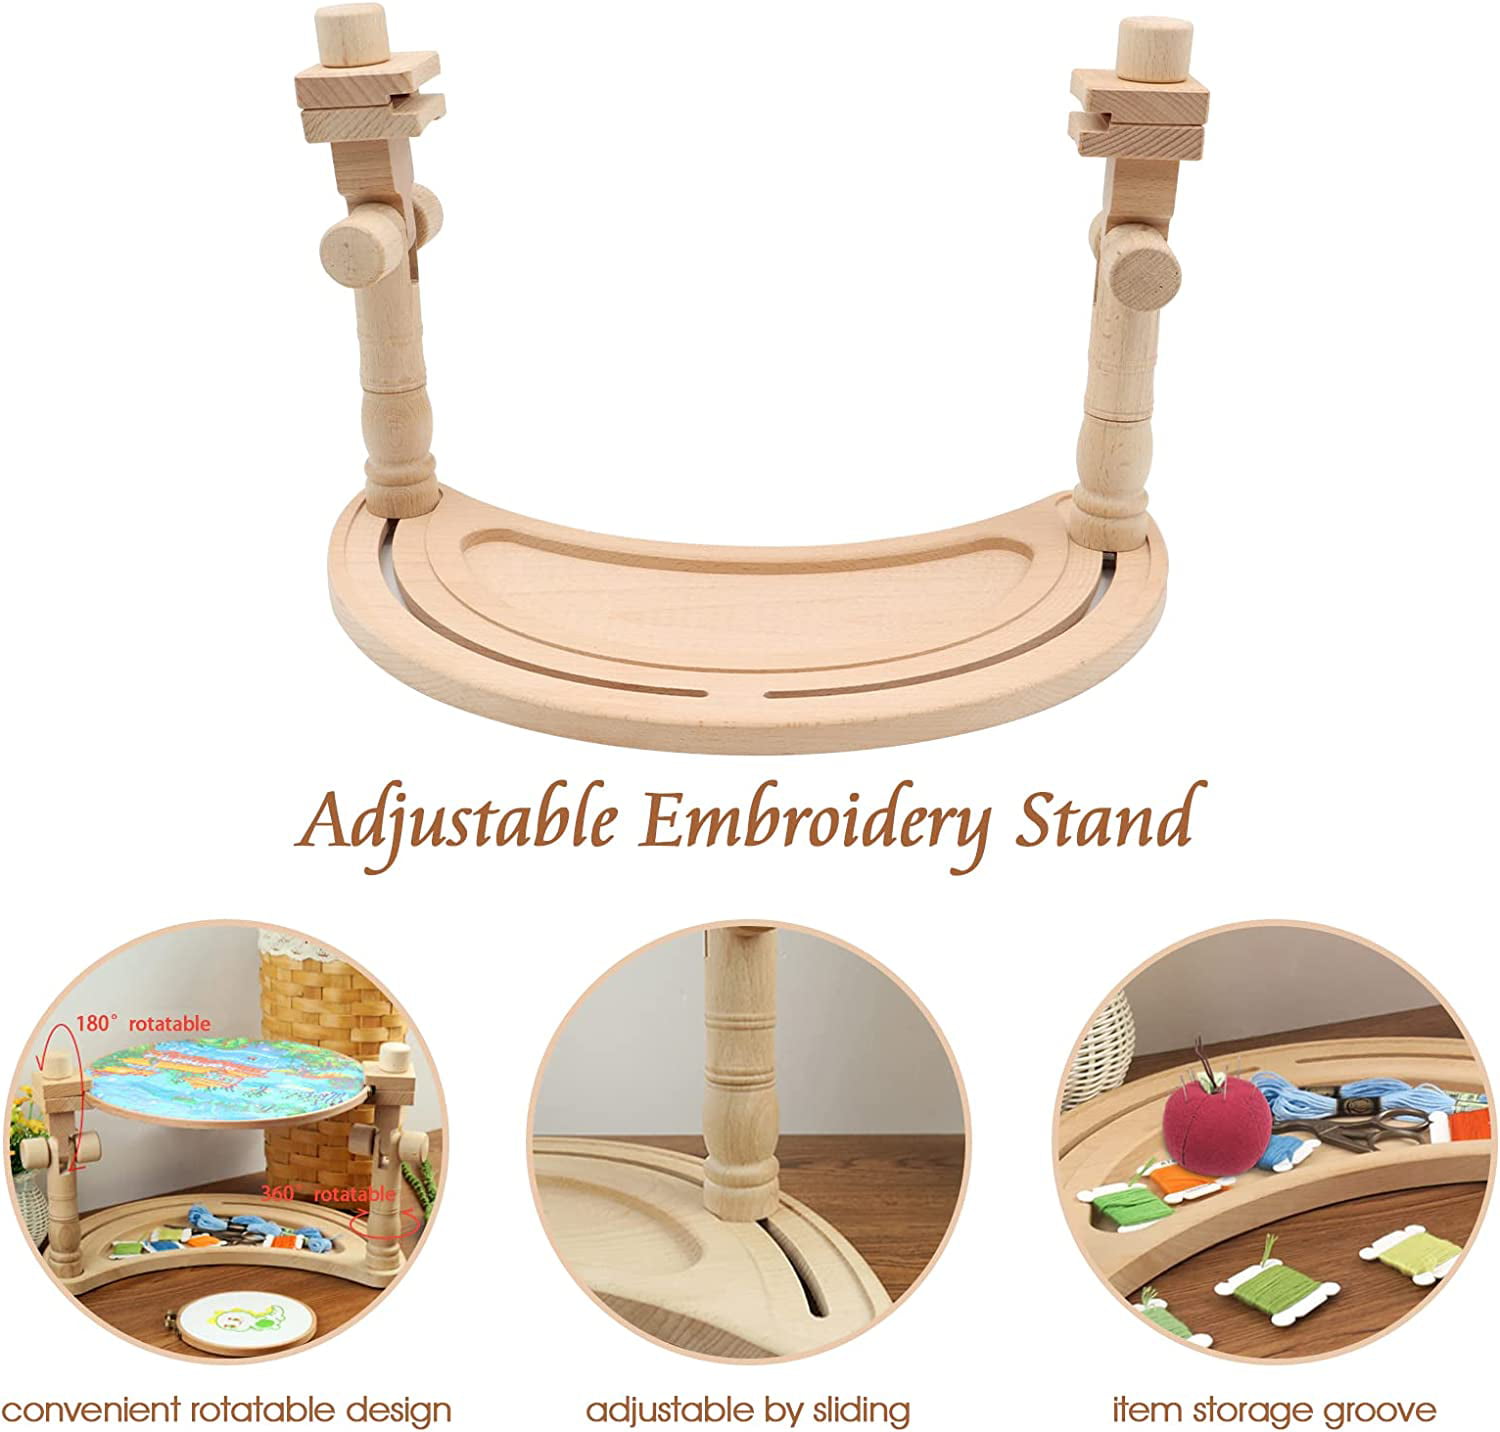 Embroidery Stand, Adjustable Rotated Cross Stitch Stand, Beech Wood  Embroidery Hoop Holder, Hands-Free Embroidery Tools for Needlepoint Sewing  Craft - Only Incl…